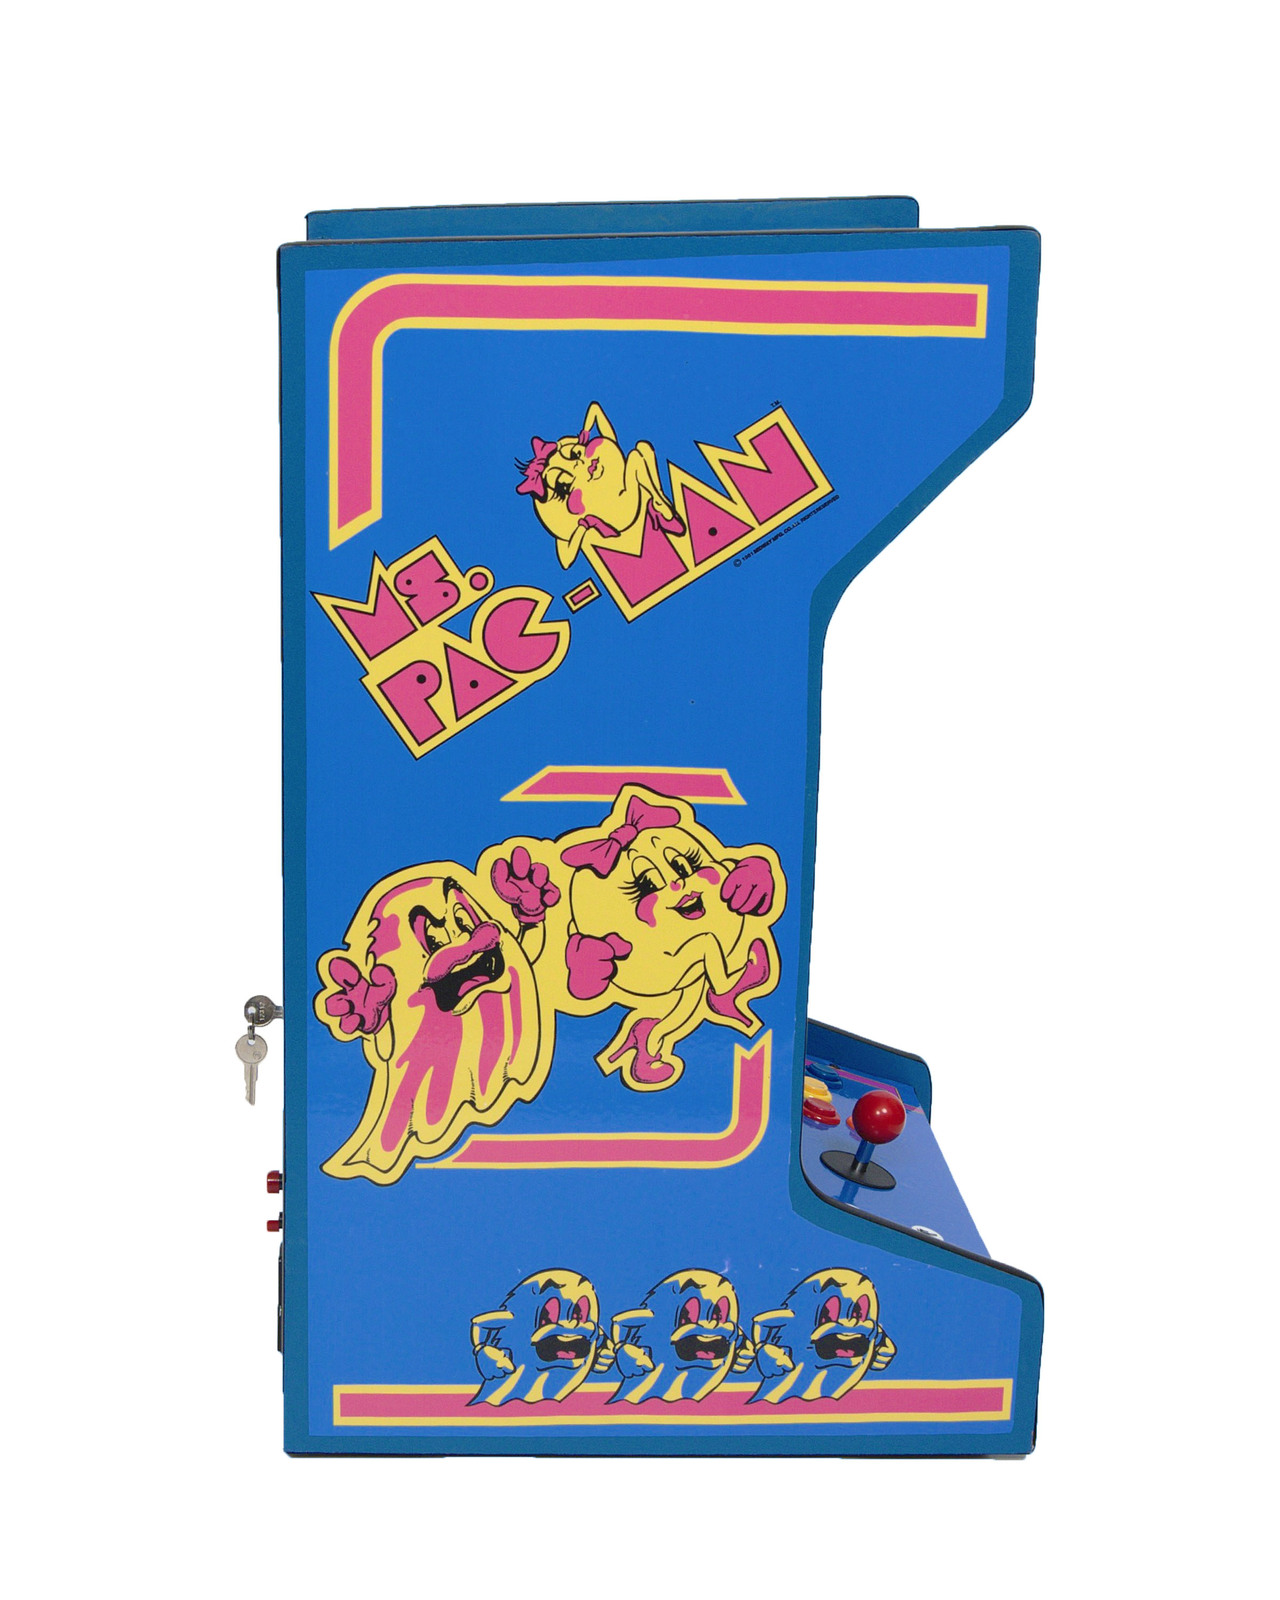 pac man arcade game for sale